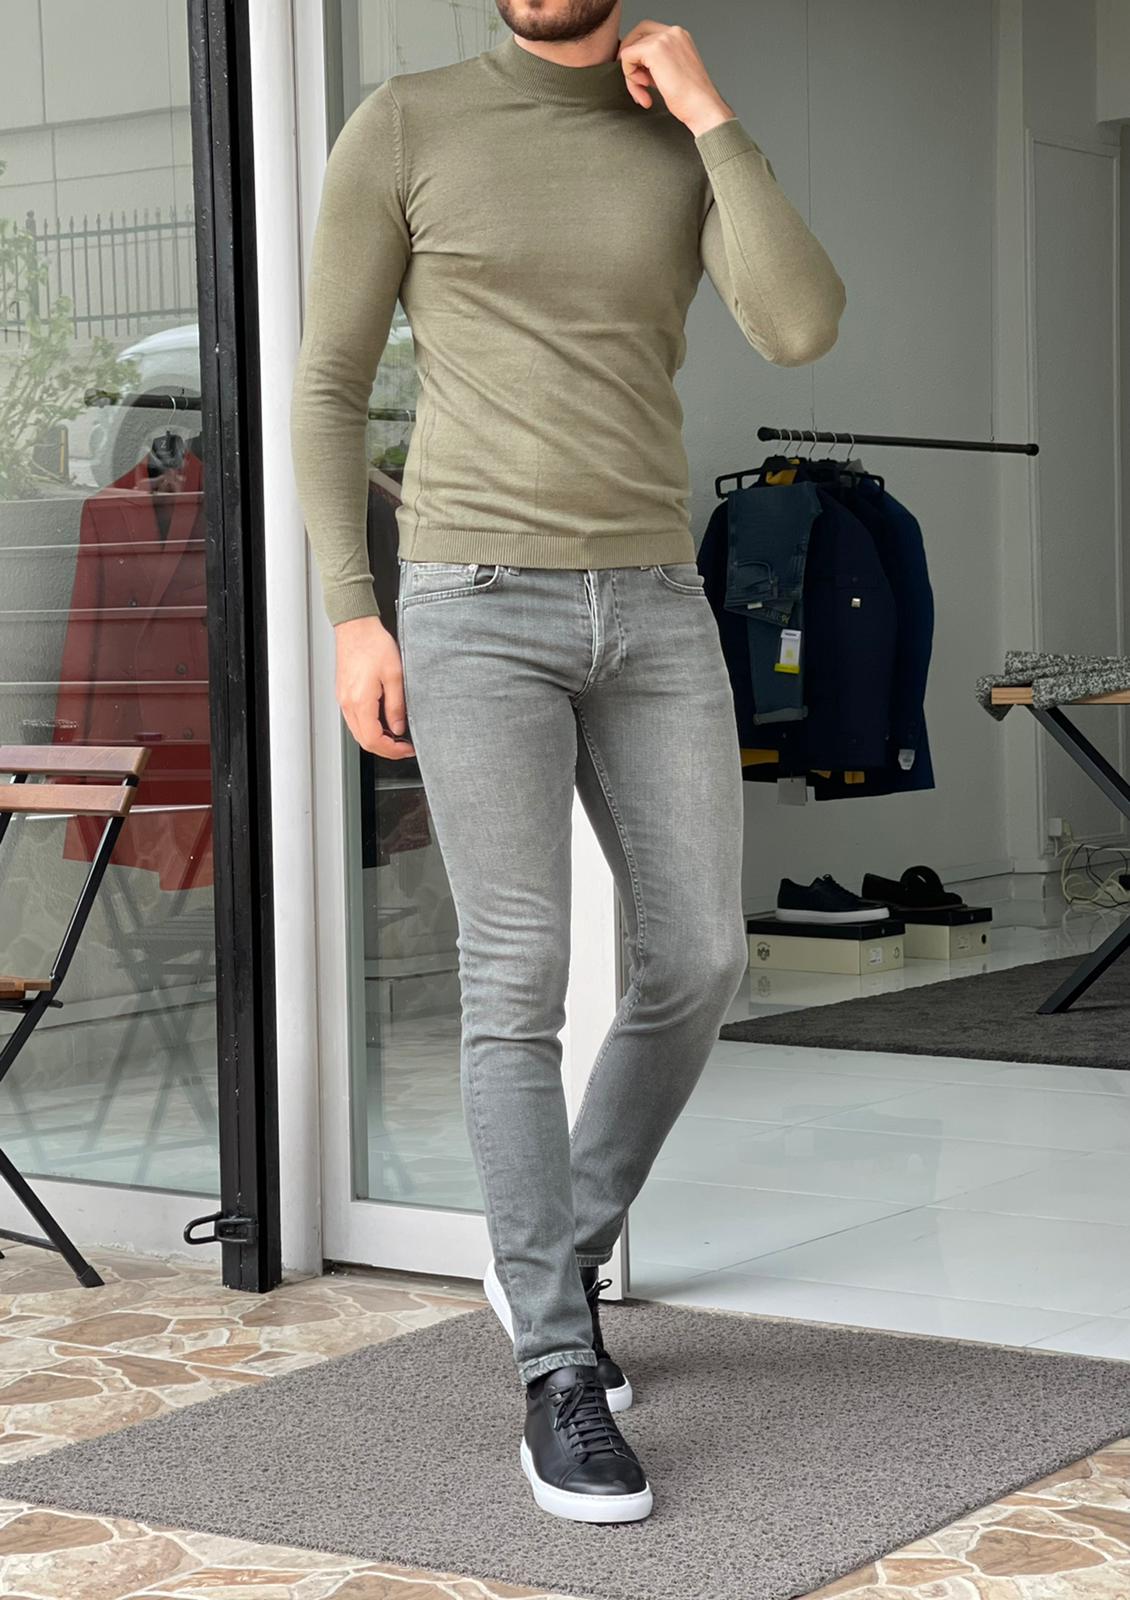 A stylish khaki turtleneck sweater by Hollo. The sweater is made of soft, ribbed fabric and features a high neckline.